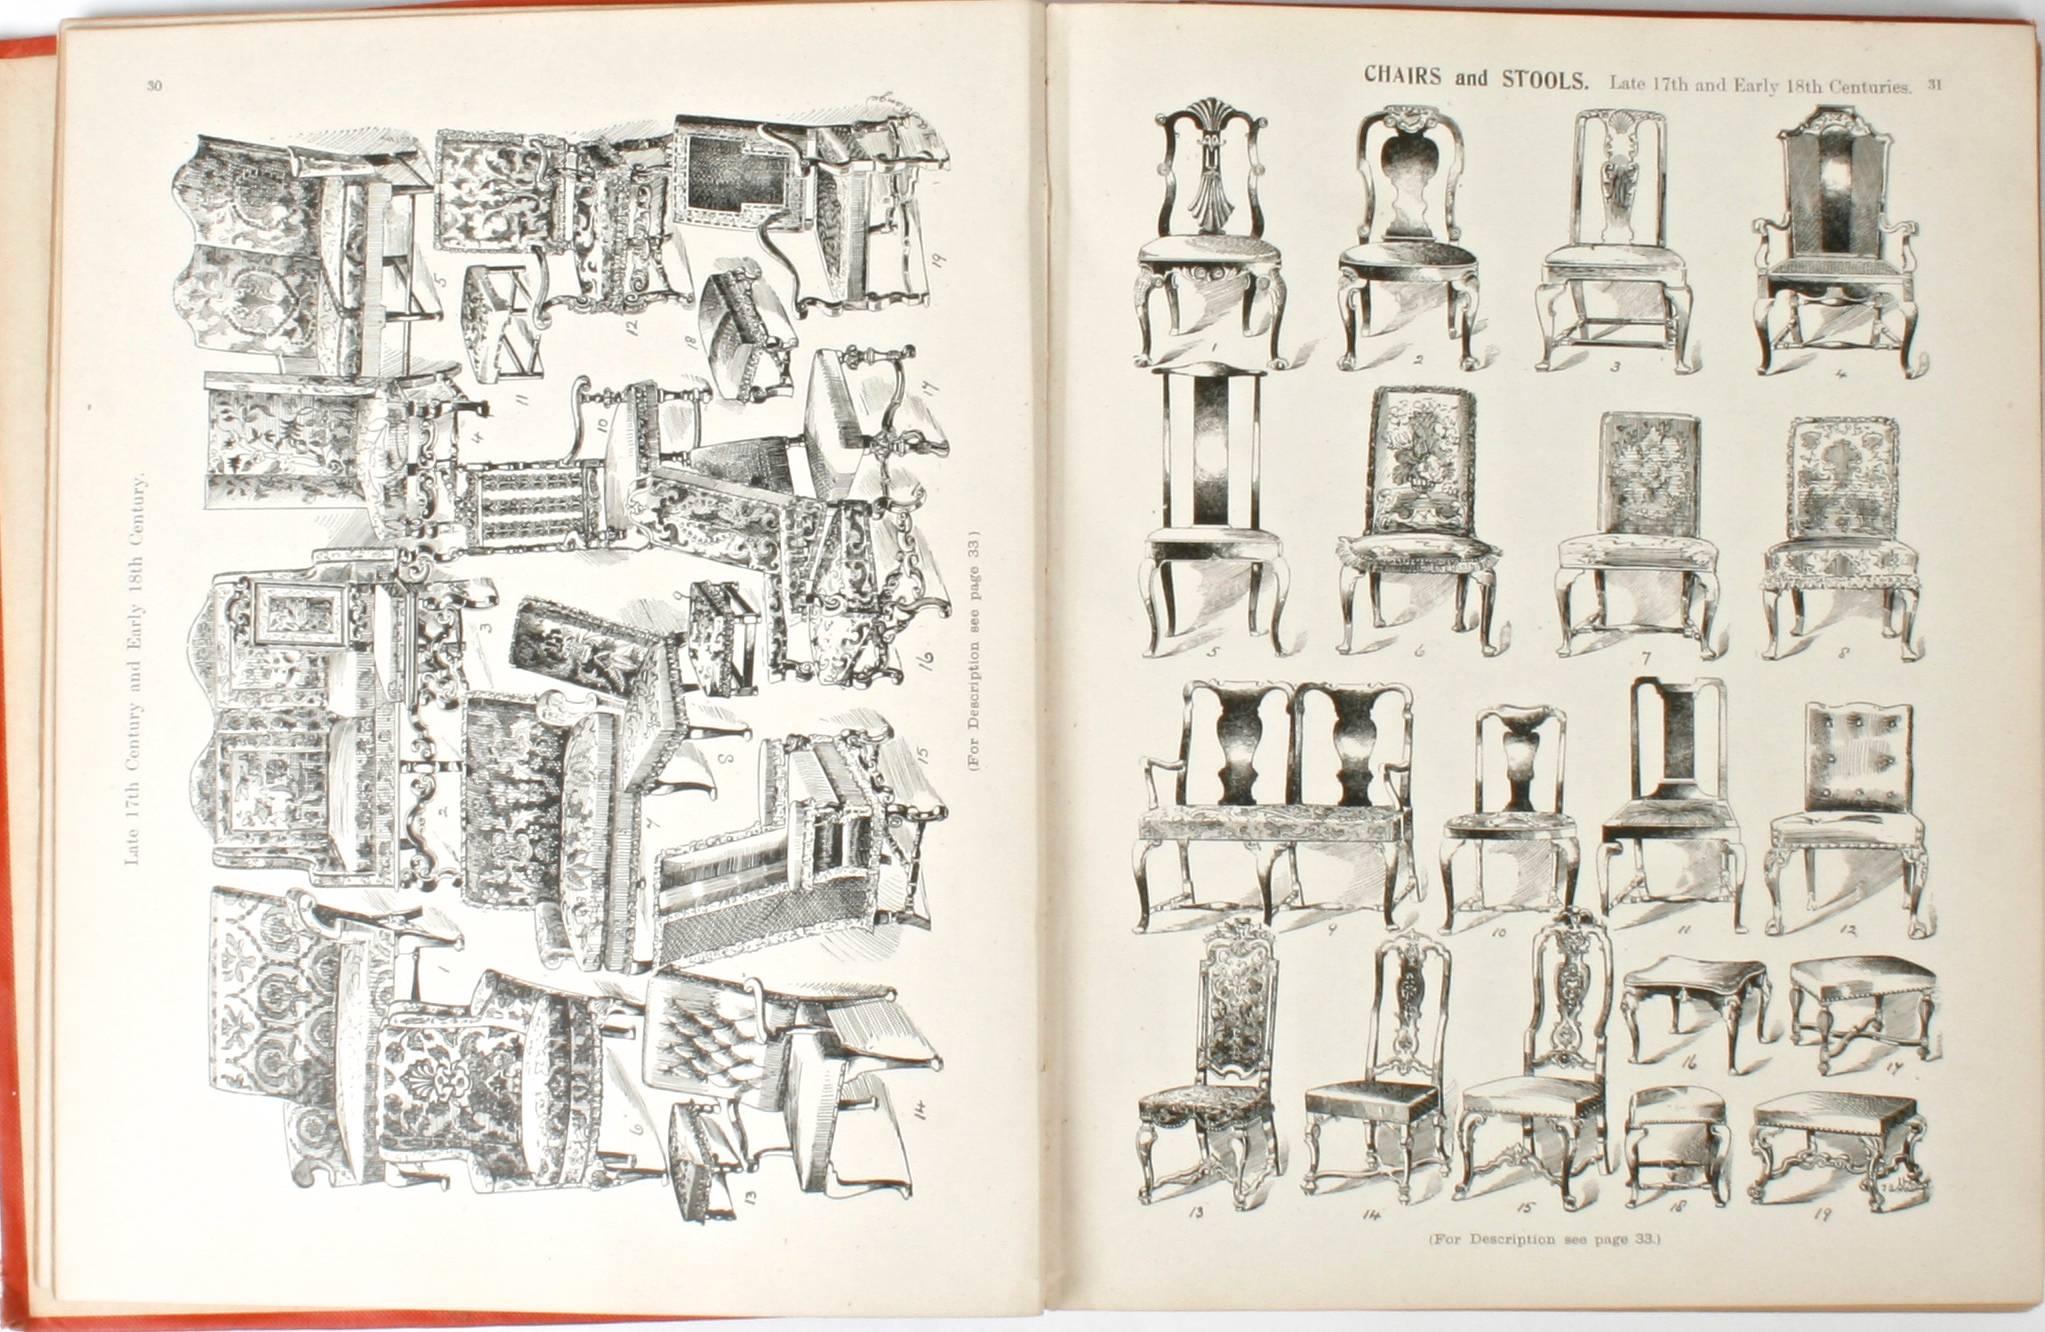 British English Furniture, Woodwork, Decoration, During the 18th c, 1st Ed